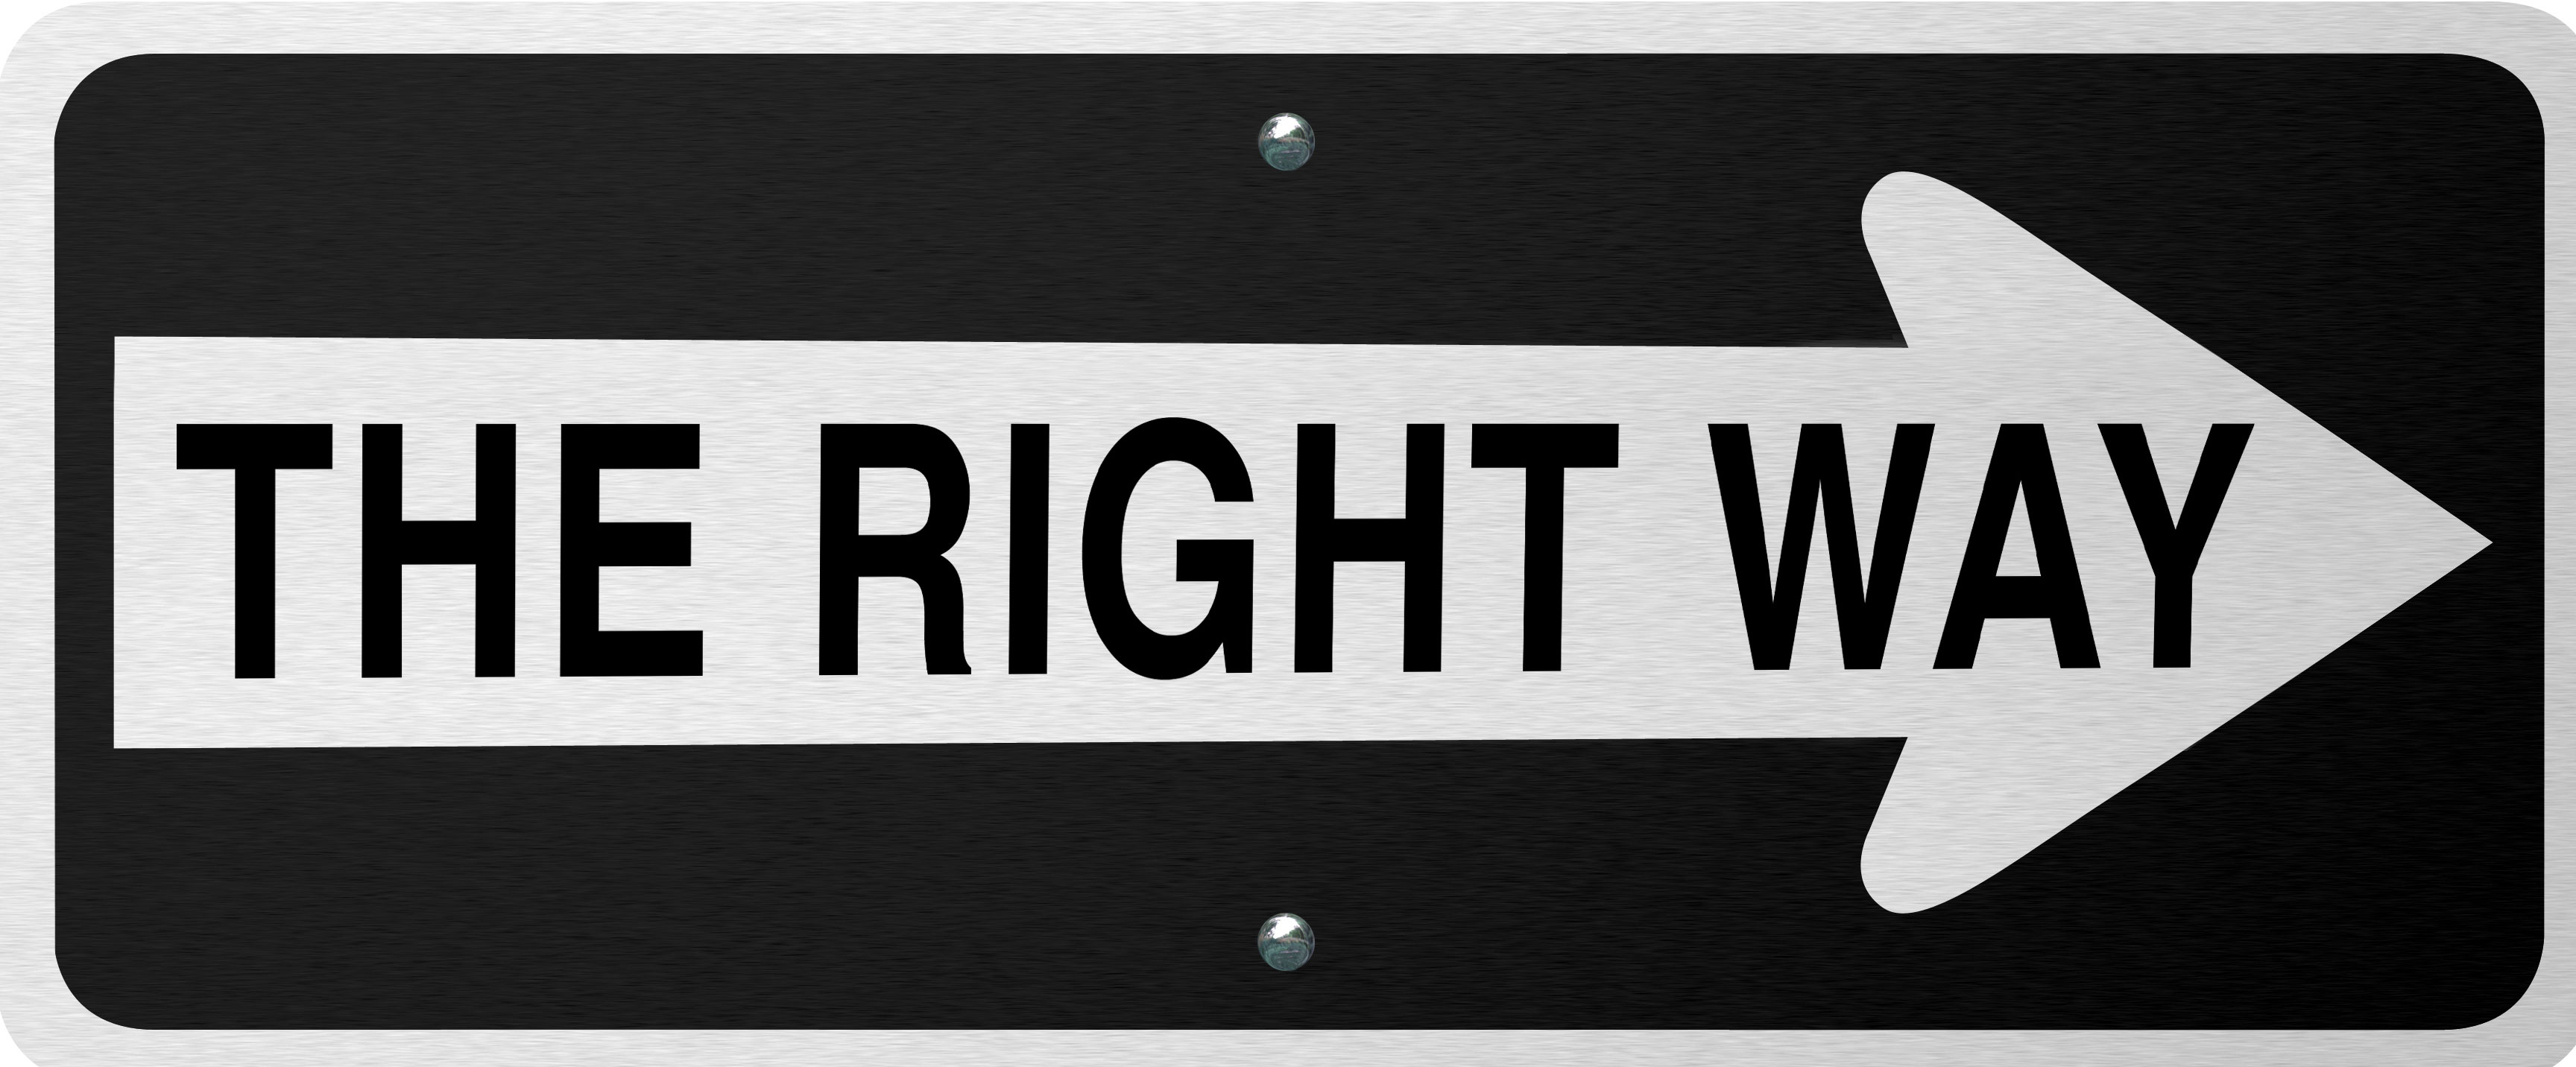 Right this way. Right way. Right way дизайн. Eventik the right way. Rig.